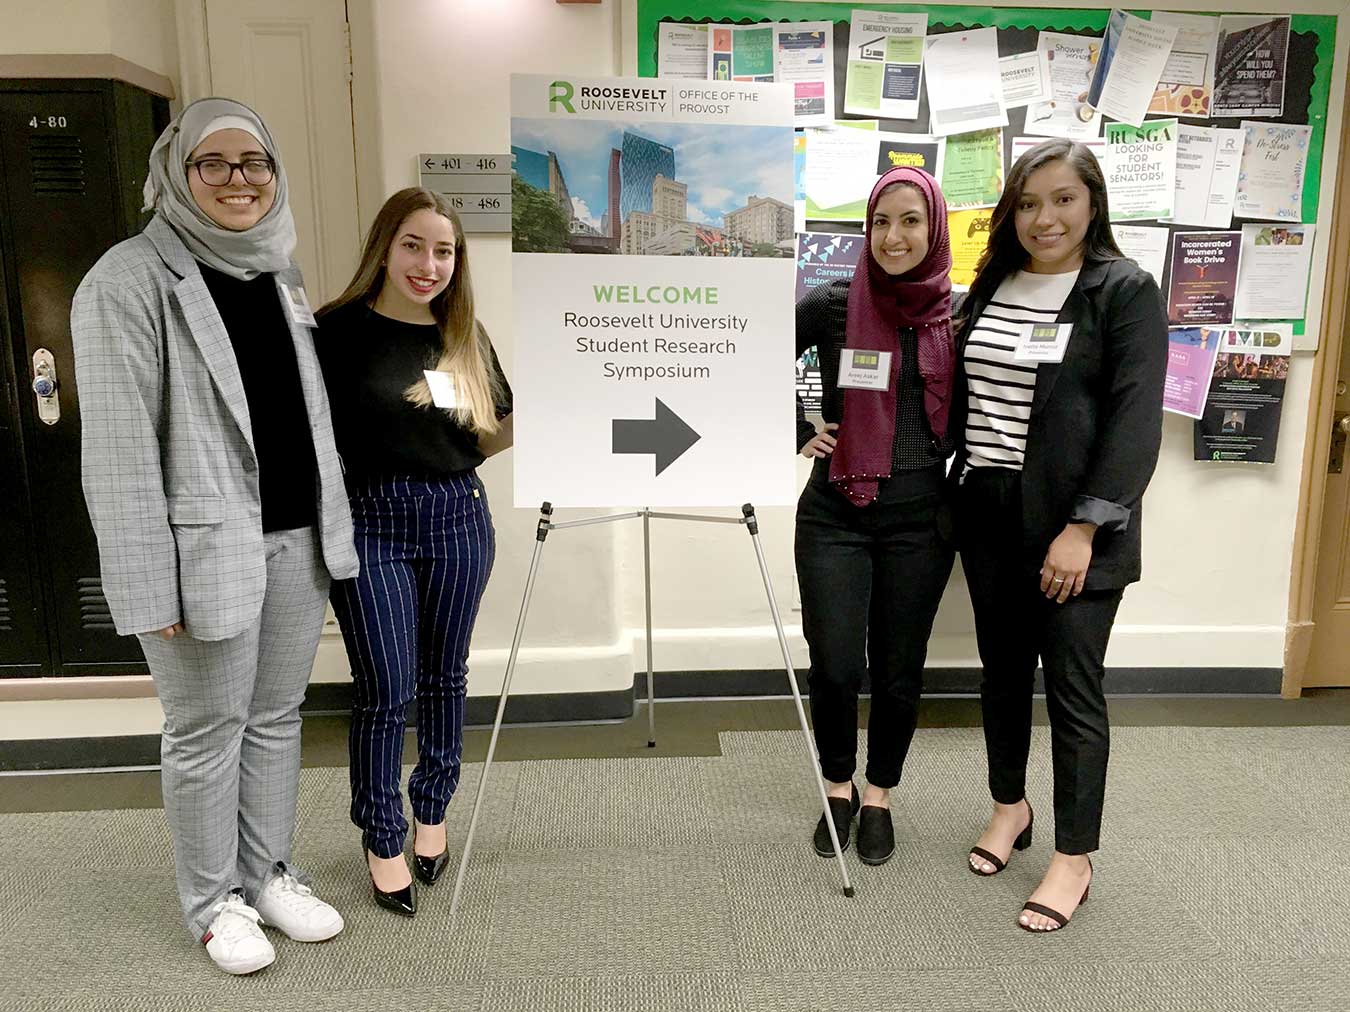 four students standing by a sign for the Student Research Symposium